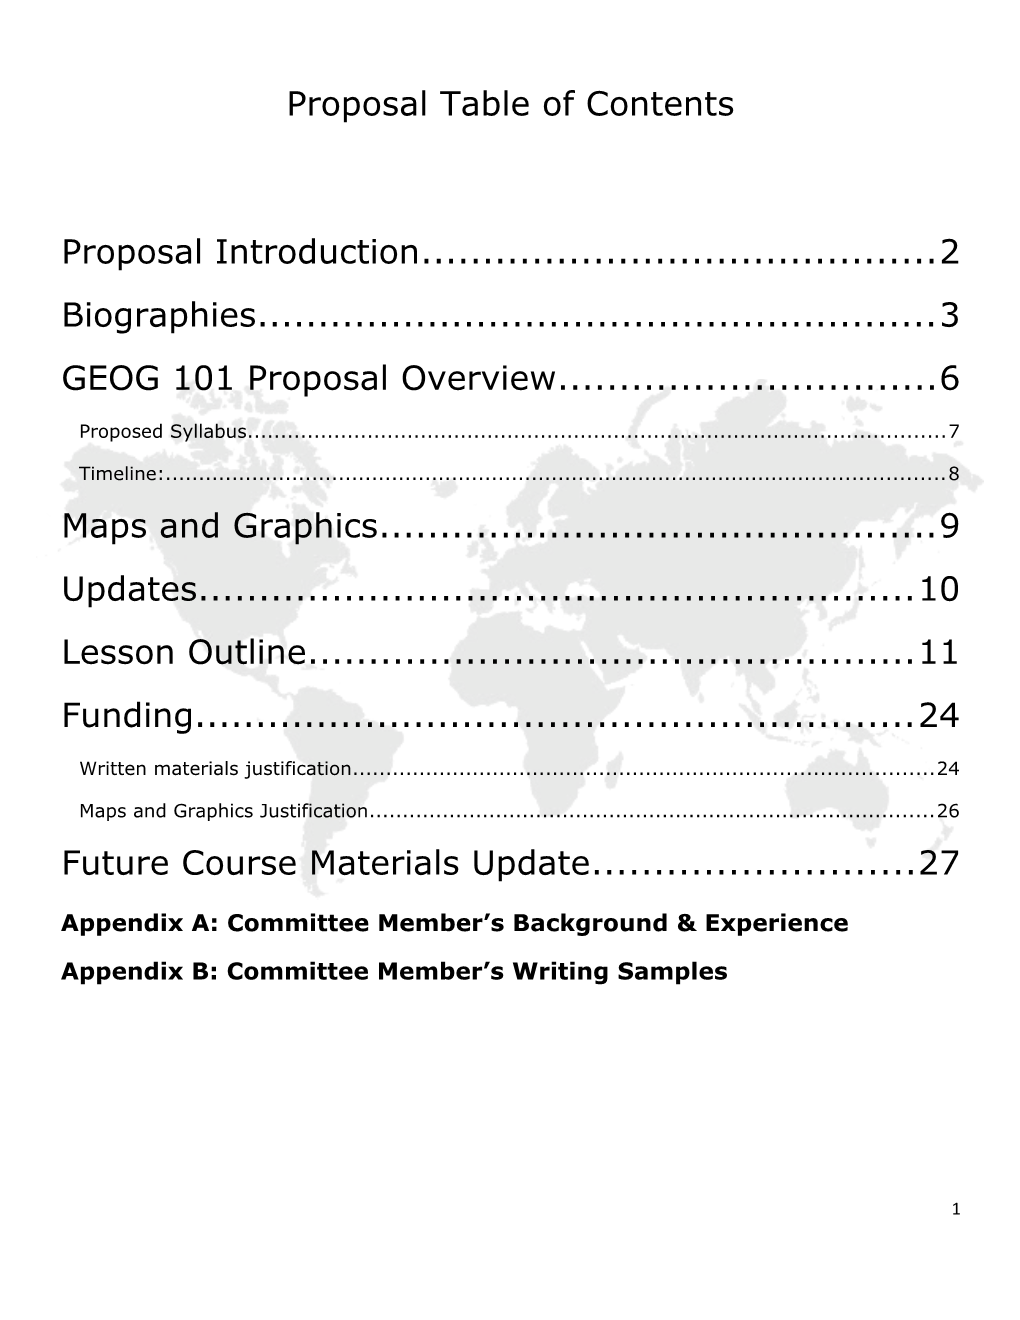 Proposal Table of Contents